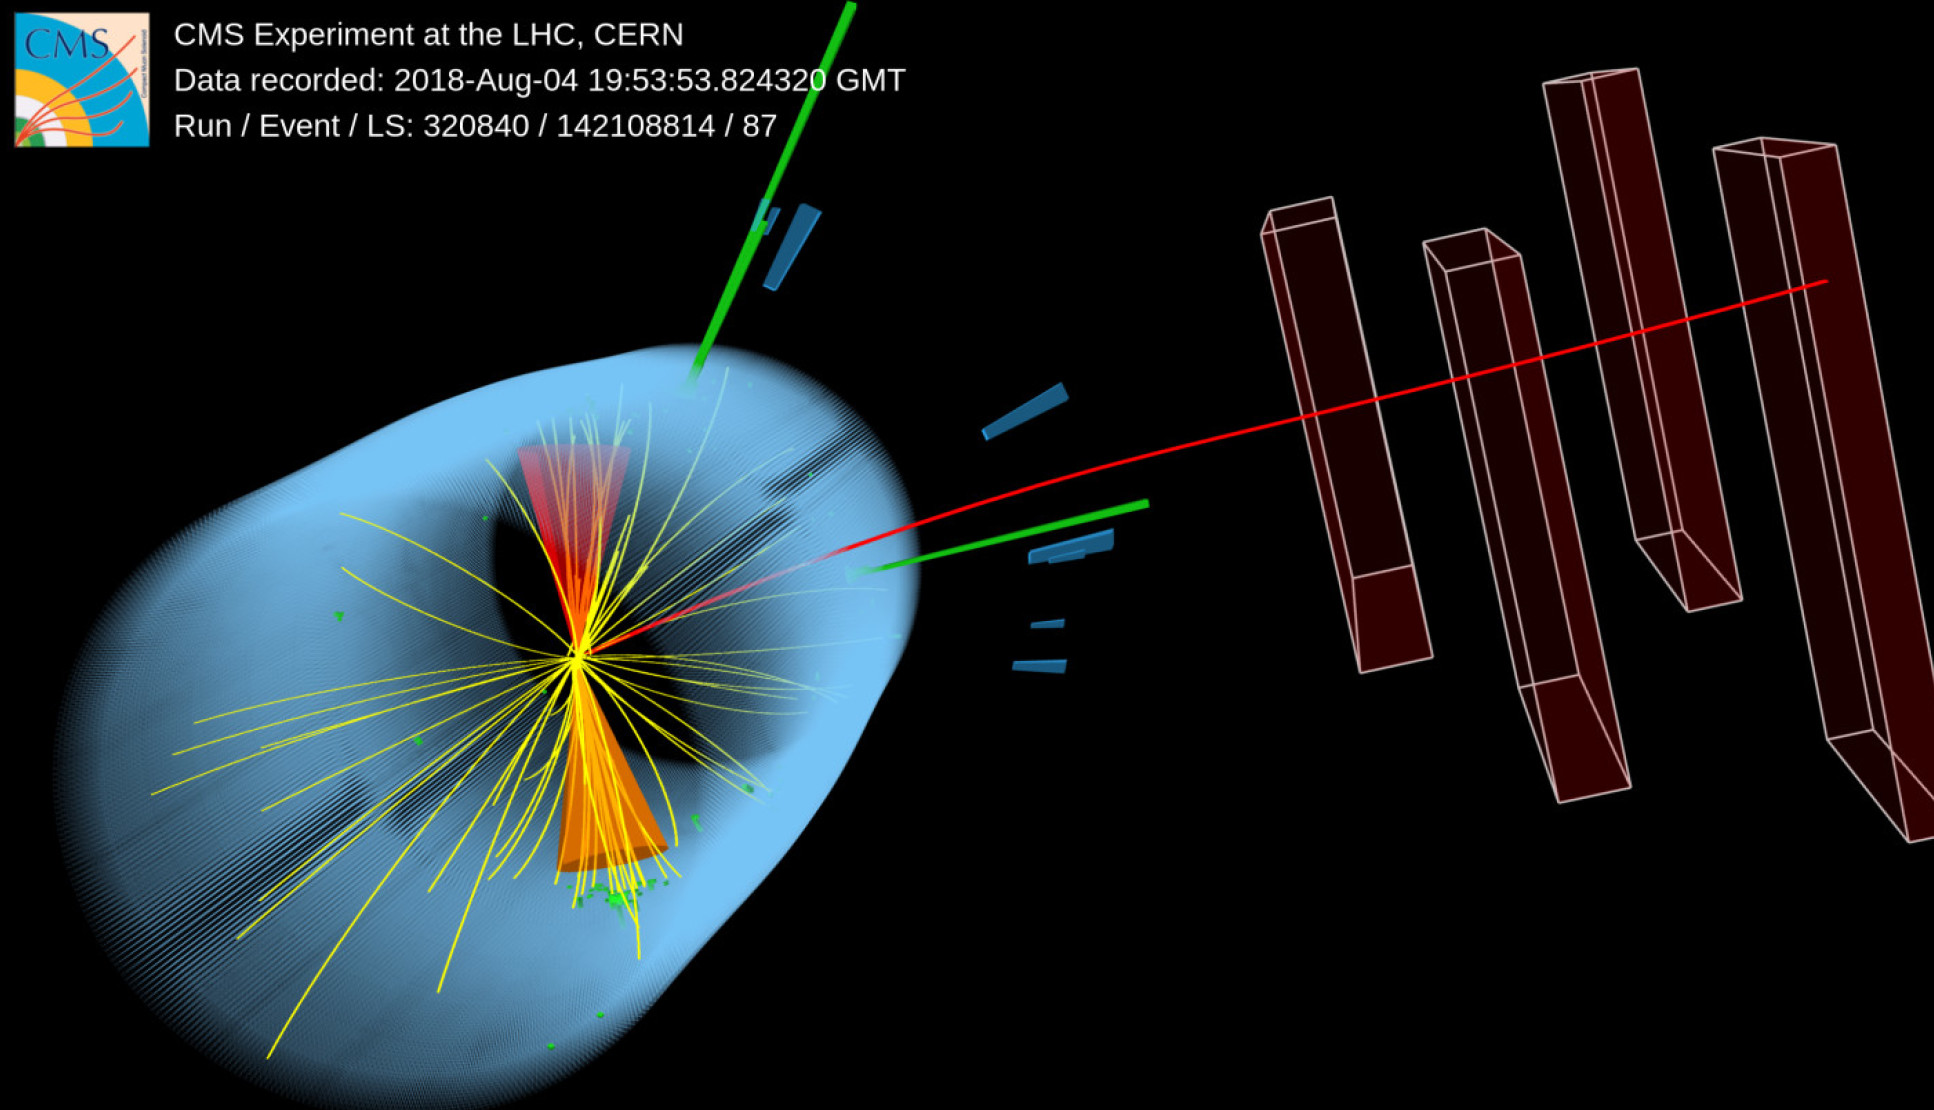 Visualisation of a collision inside the LHC, with lines showing the decay of the Higgs boson